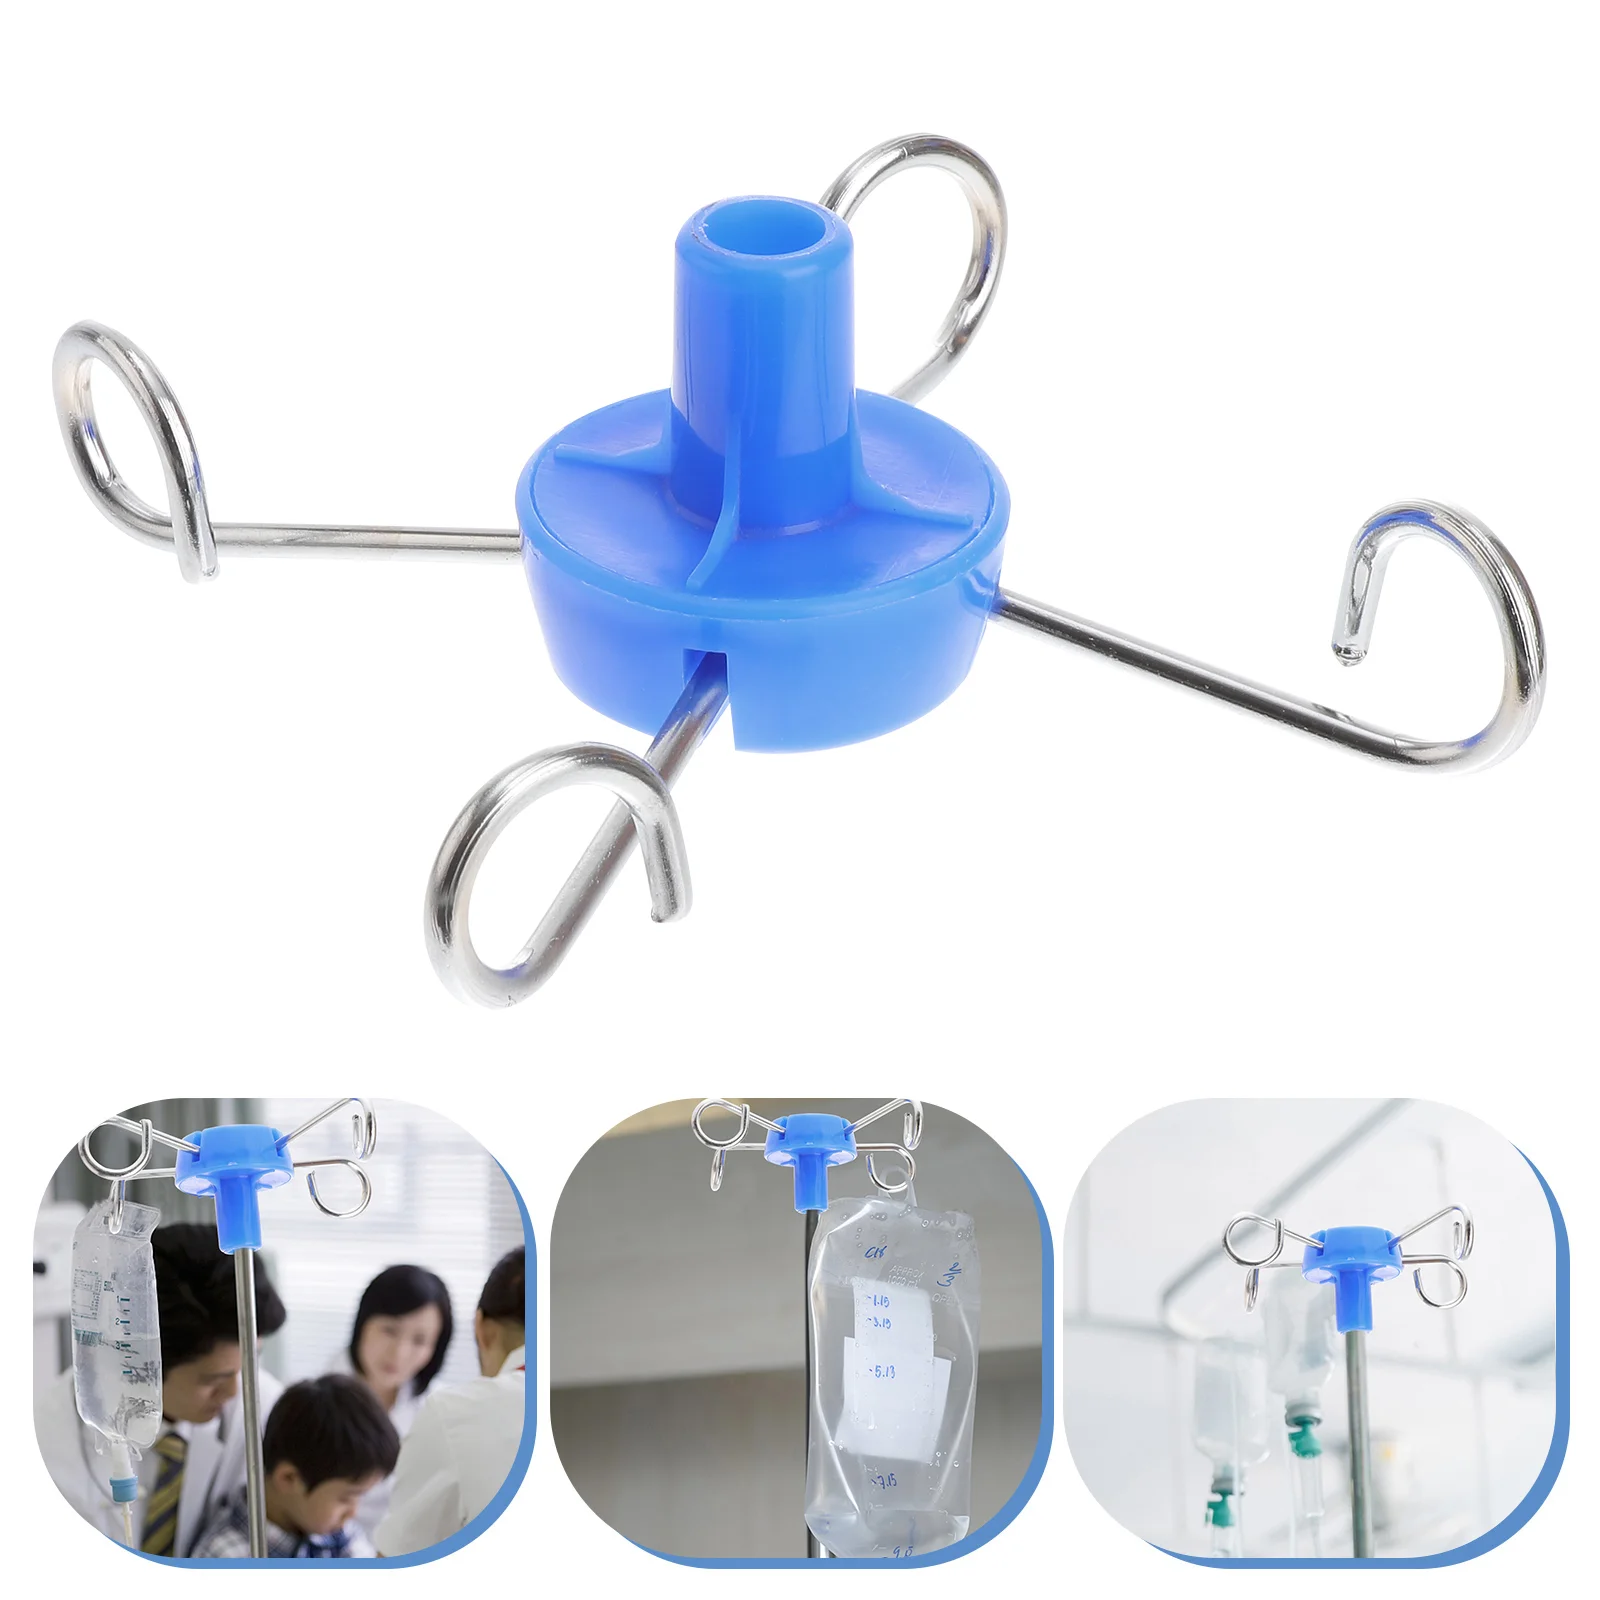 

3 Pcs IV Pole Hook Hanging Infusion Rack Metal Clothes Hangers Accessories Bottle Stand Hooks Stainless Steel Standing Clothing